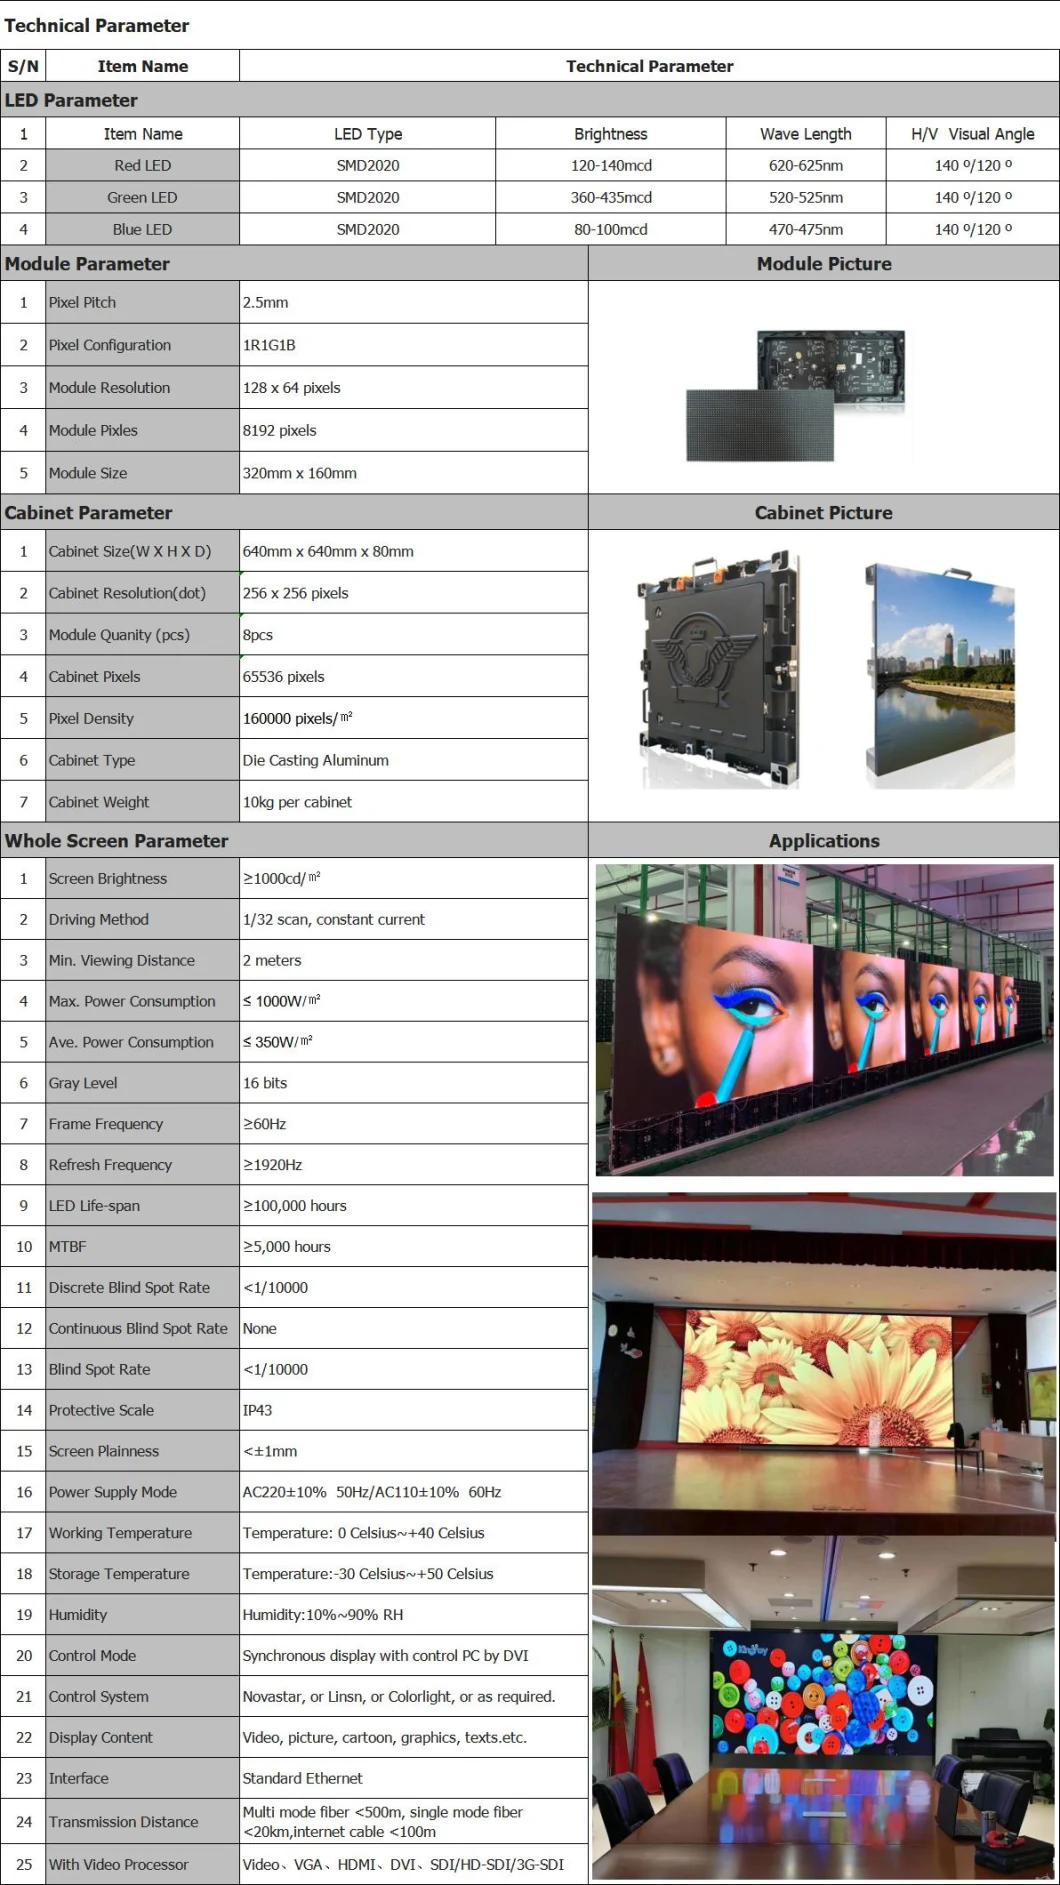 2021 Hot Sale Best Quality Cost-Effective Design 2.5mm Indoor LED Screens